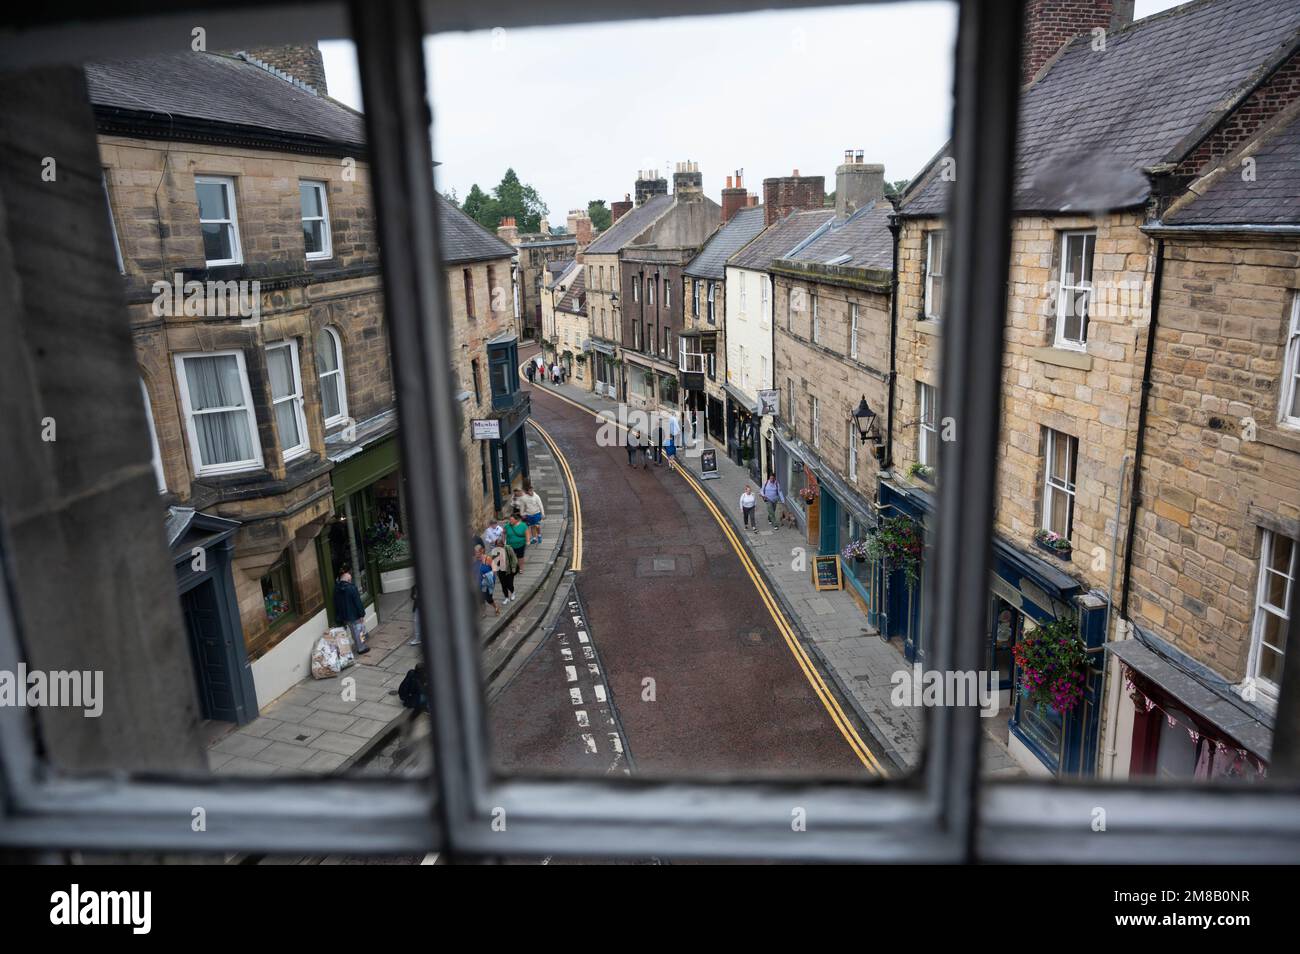 Alnwick, Northumberland, which was voted the best place to live in the UK by the Sunday Times in 2020 Stock Photo